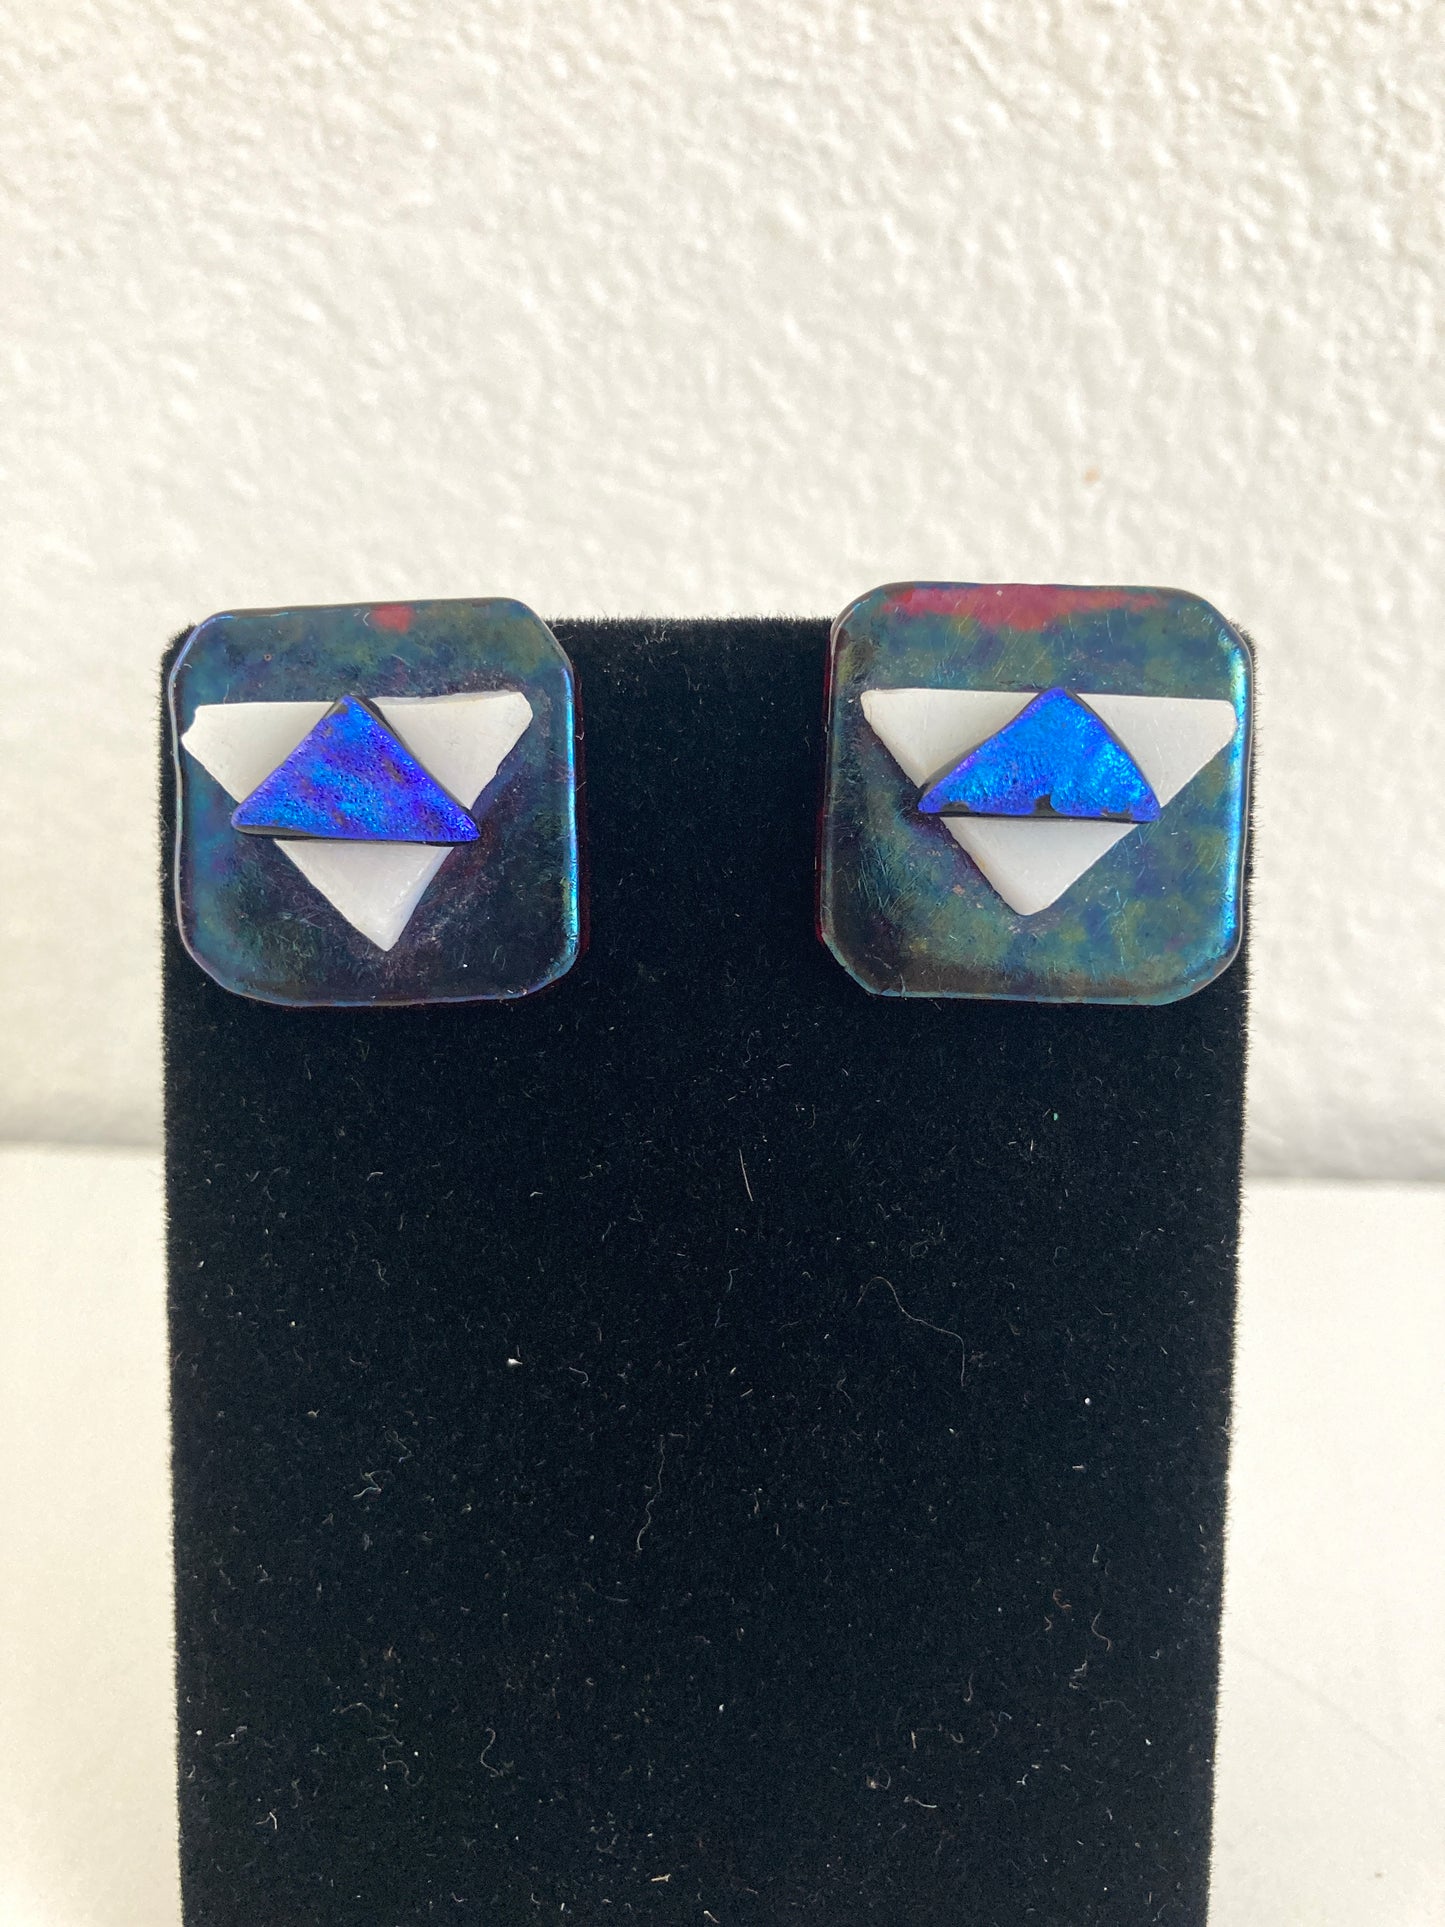 Dichroic Glass Earrings in Red, White, and Blue